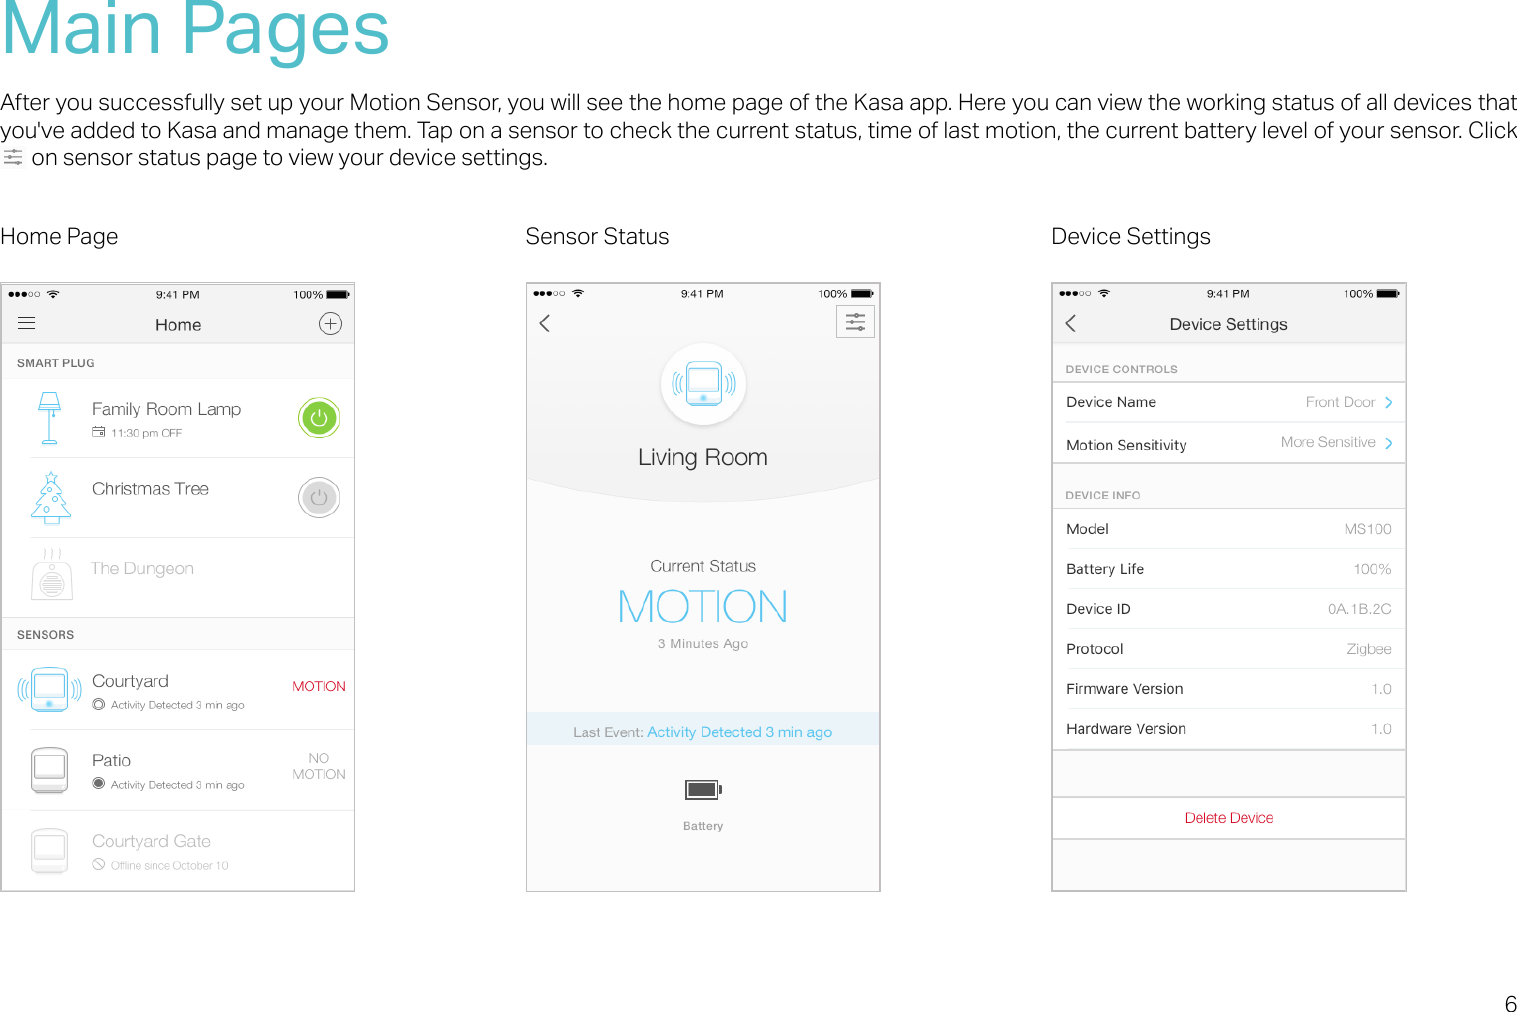 6Main PagesAfter you successfully set up your Motion Sensor, you will see the home page of the Kasa app. Here you can view the working status of all devices that you&apos;ve added to Kasa and manage them. Tap on a sensor to check the current status, time of last motion, the current battery level of your sensor. Click           on sensor status page to view your device settings.Home Page   Sensor Status Device Settings